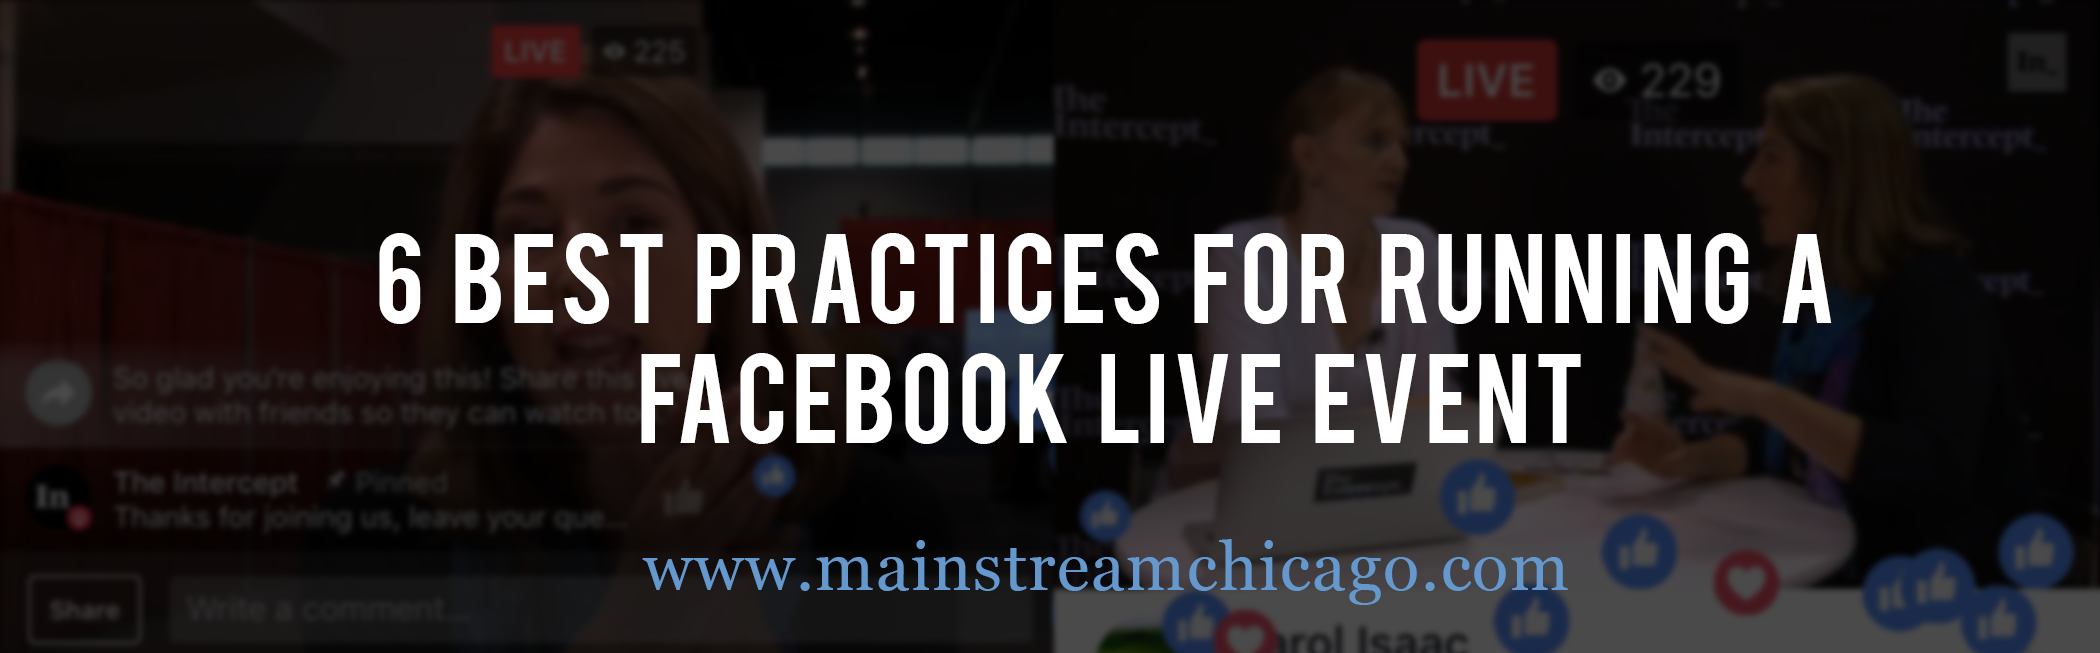 Best Practices for Facebook Live Streaming